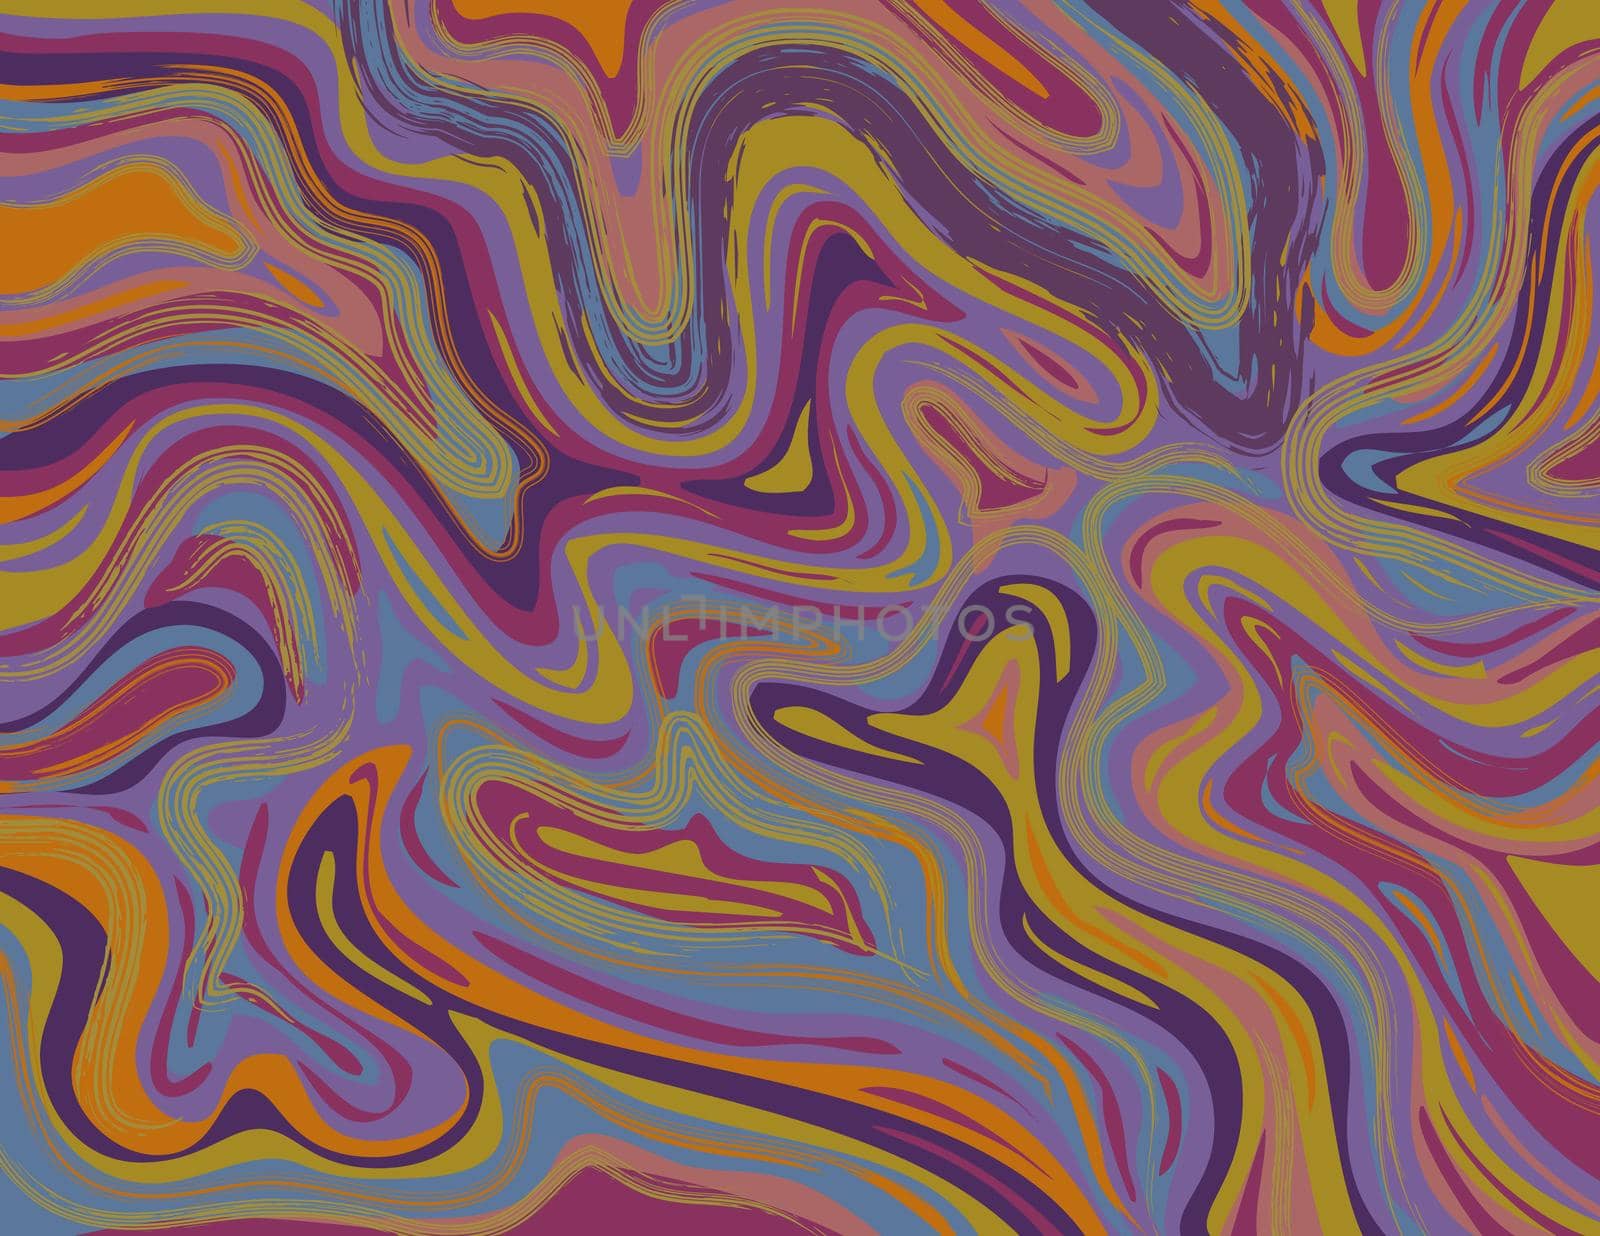 Digital marbling or inkscape illustration of an abstract swirling psychedelic liquid marble simulated marbling in Suminagashi Kintsugi marbled effect style in African Violet and Amethyst color.
